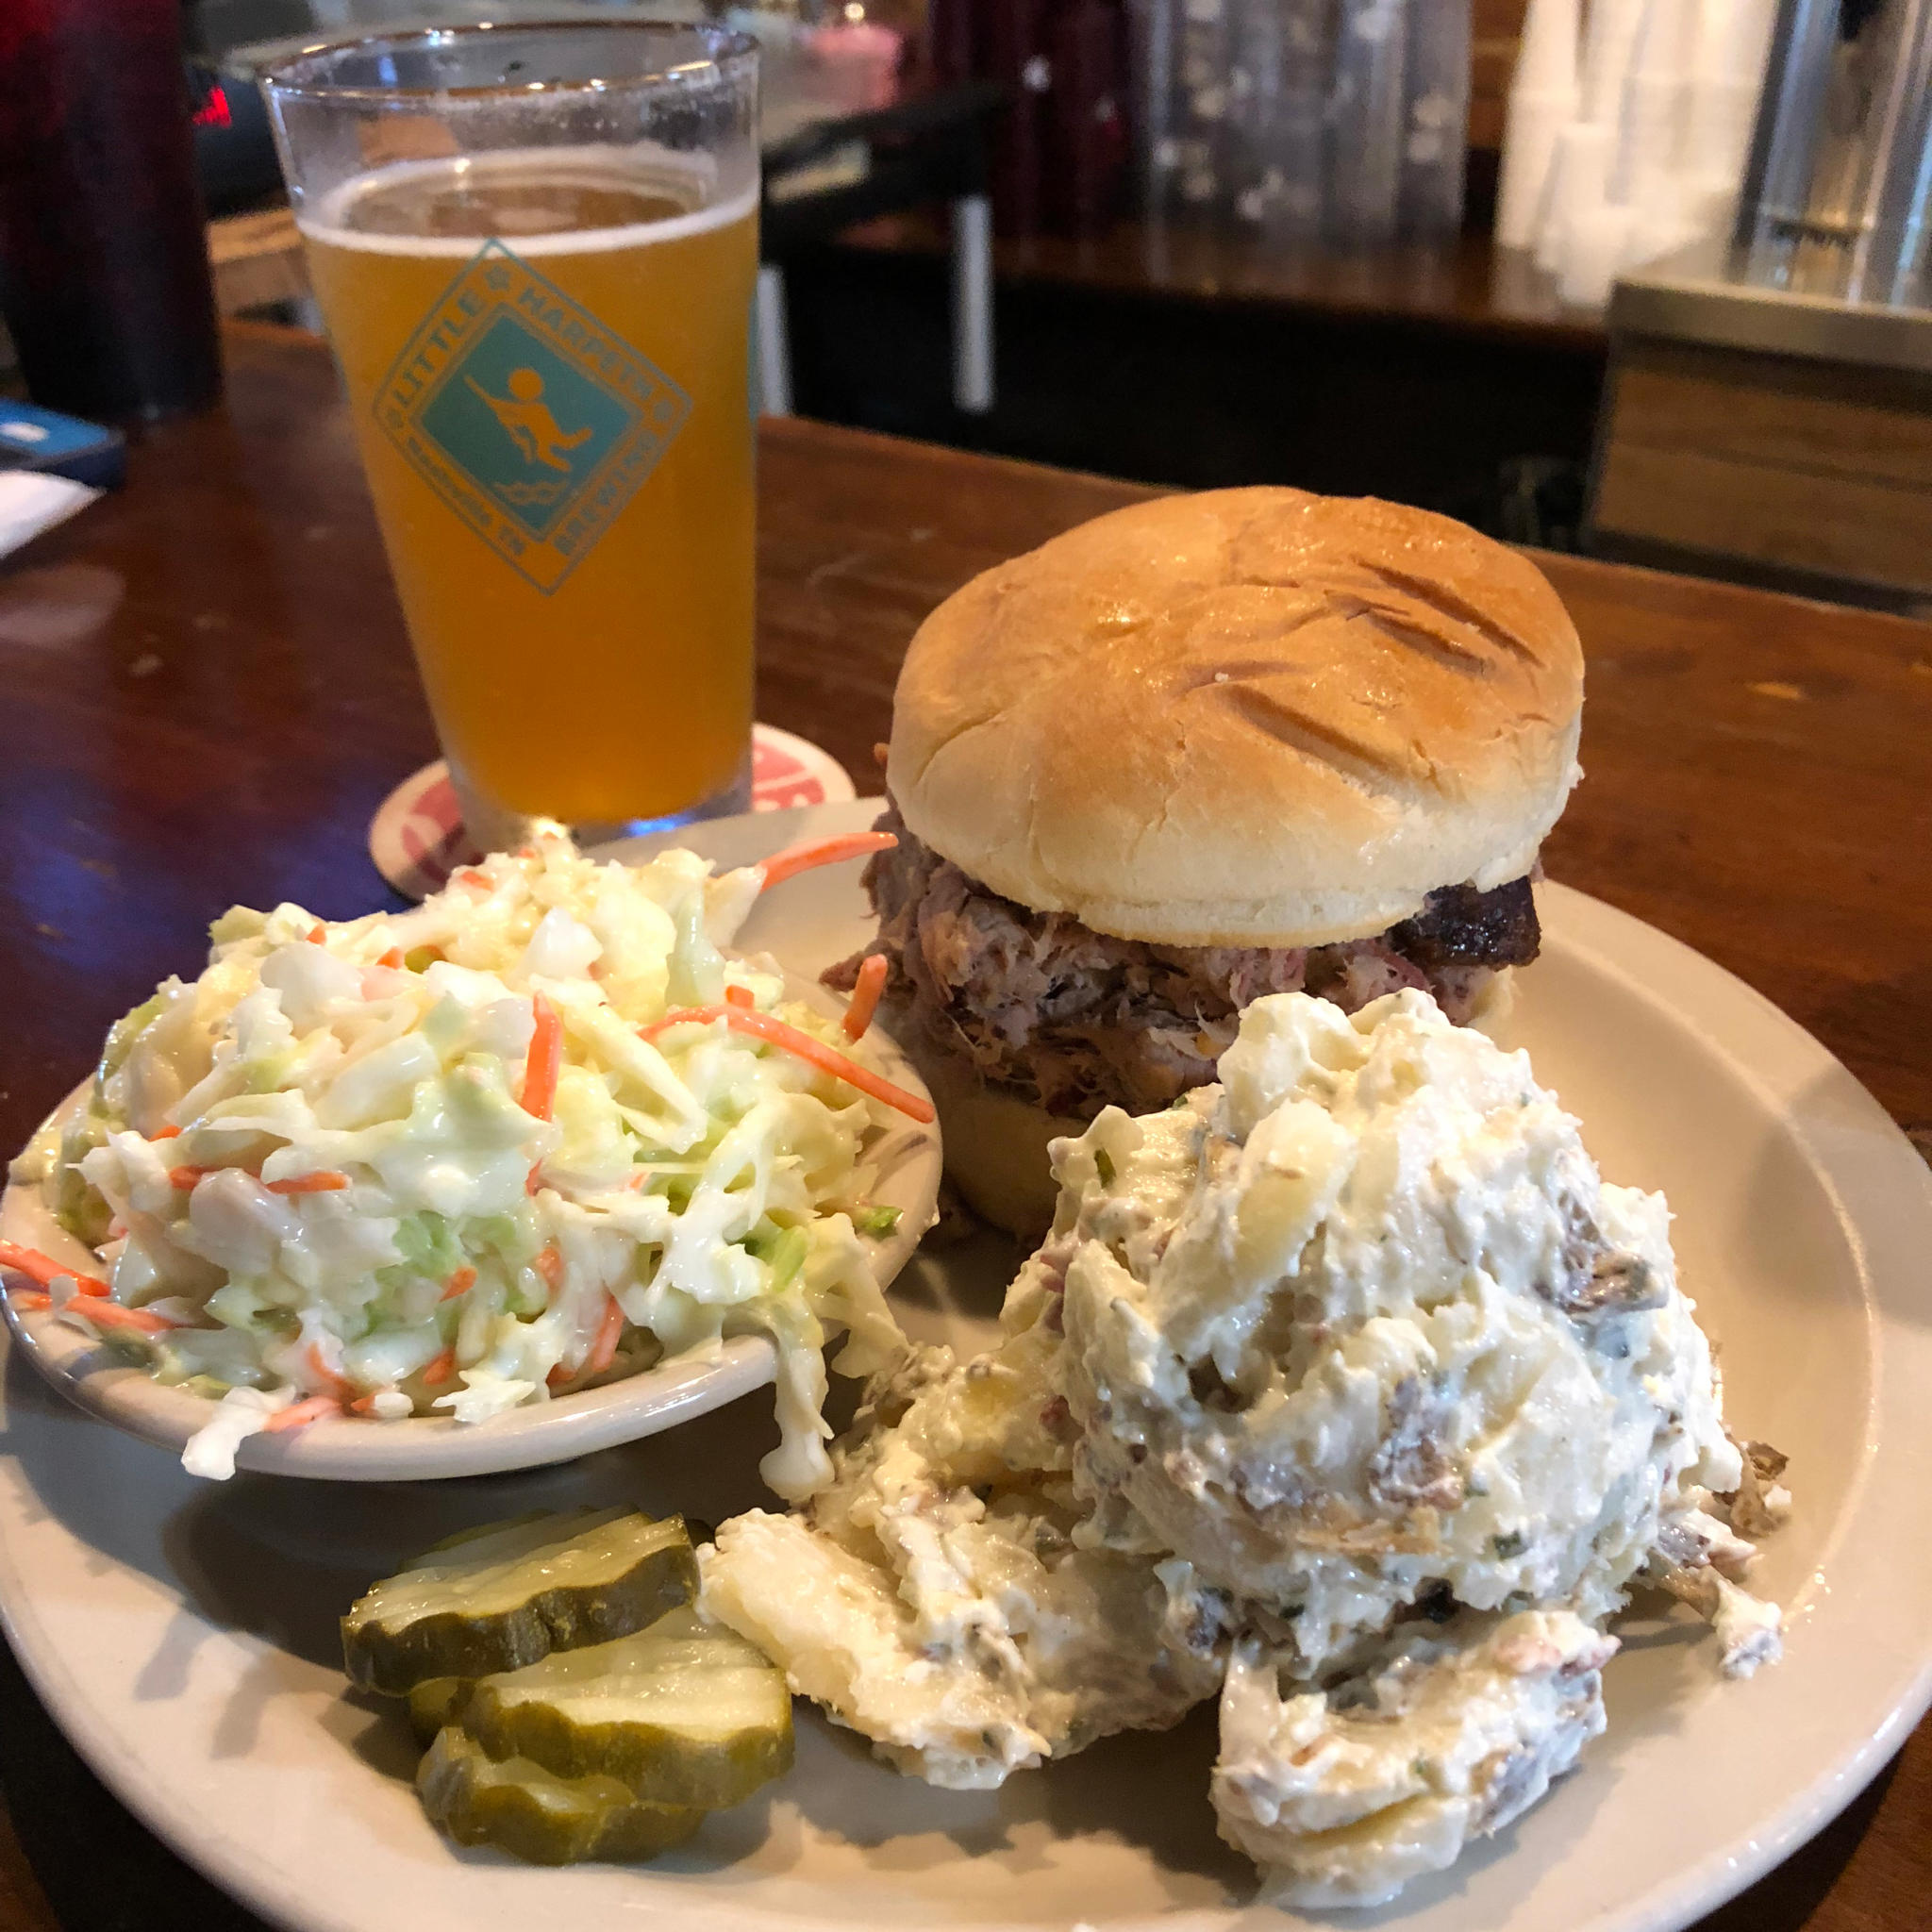 Pulled Pork BBQ Sandwich with Coleslaw and Loaded Potato Salad